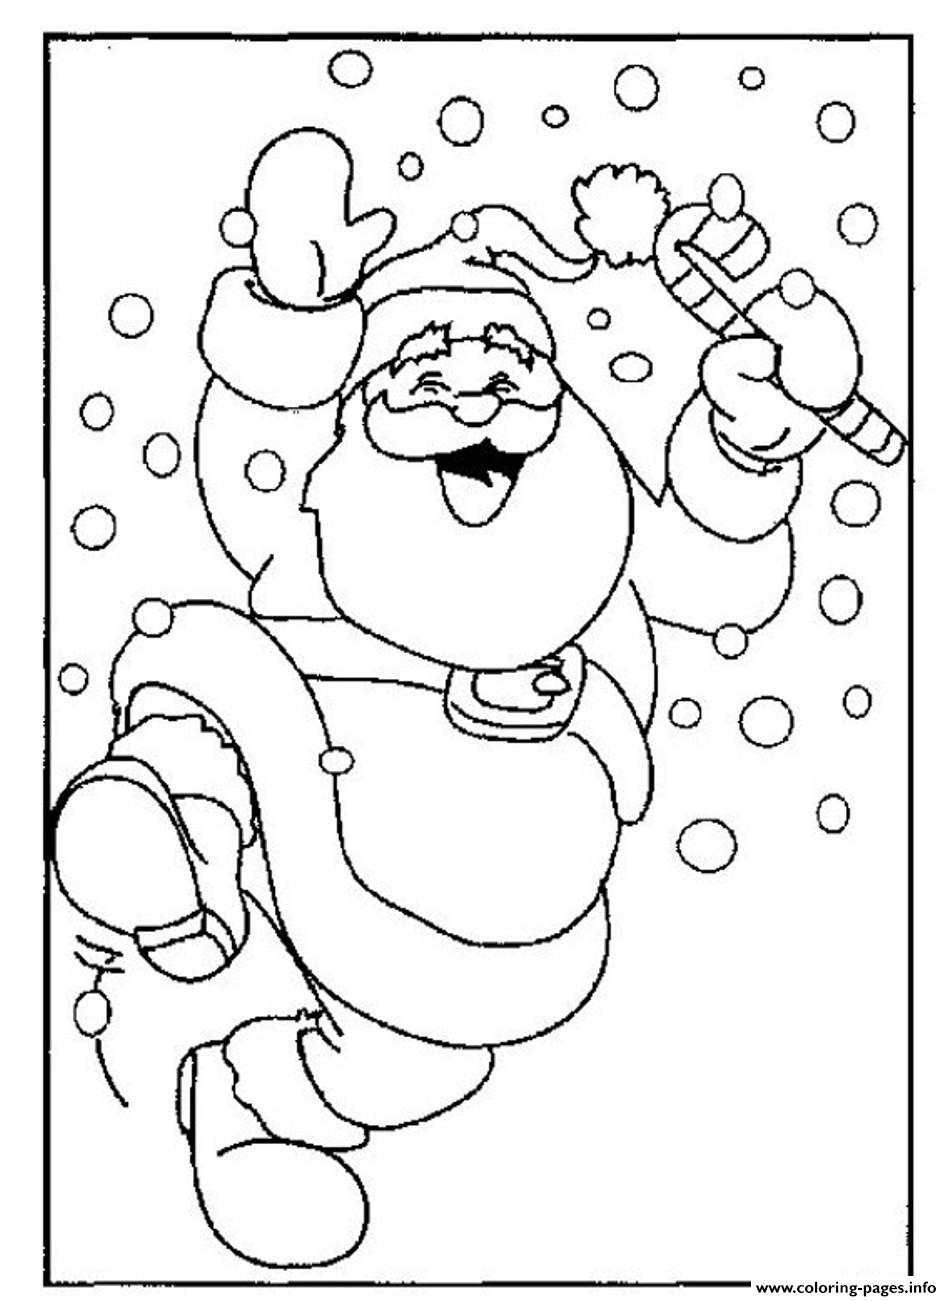 Exciting Santa Claus In Christmas S Printable1a34d coloring